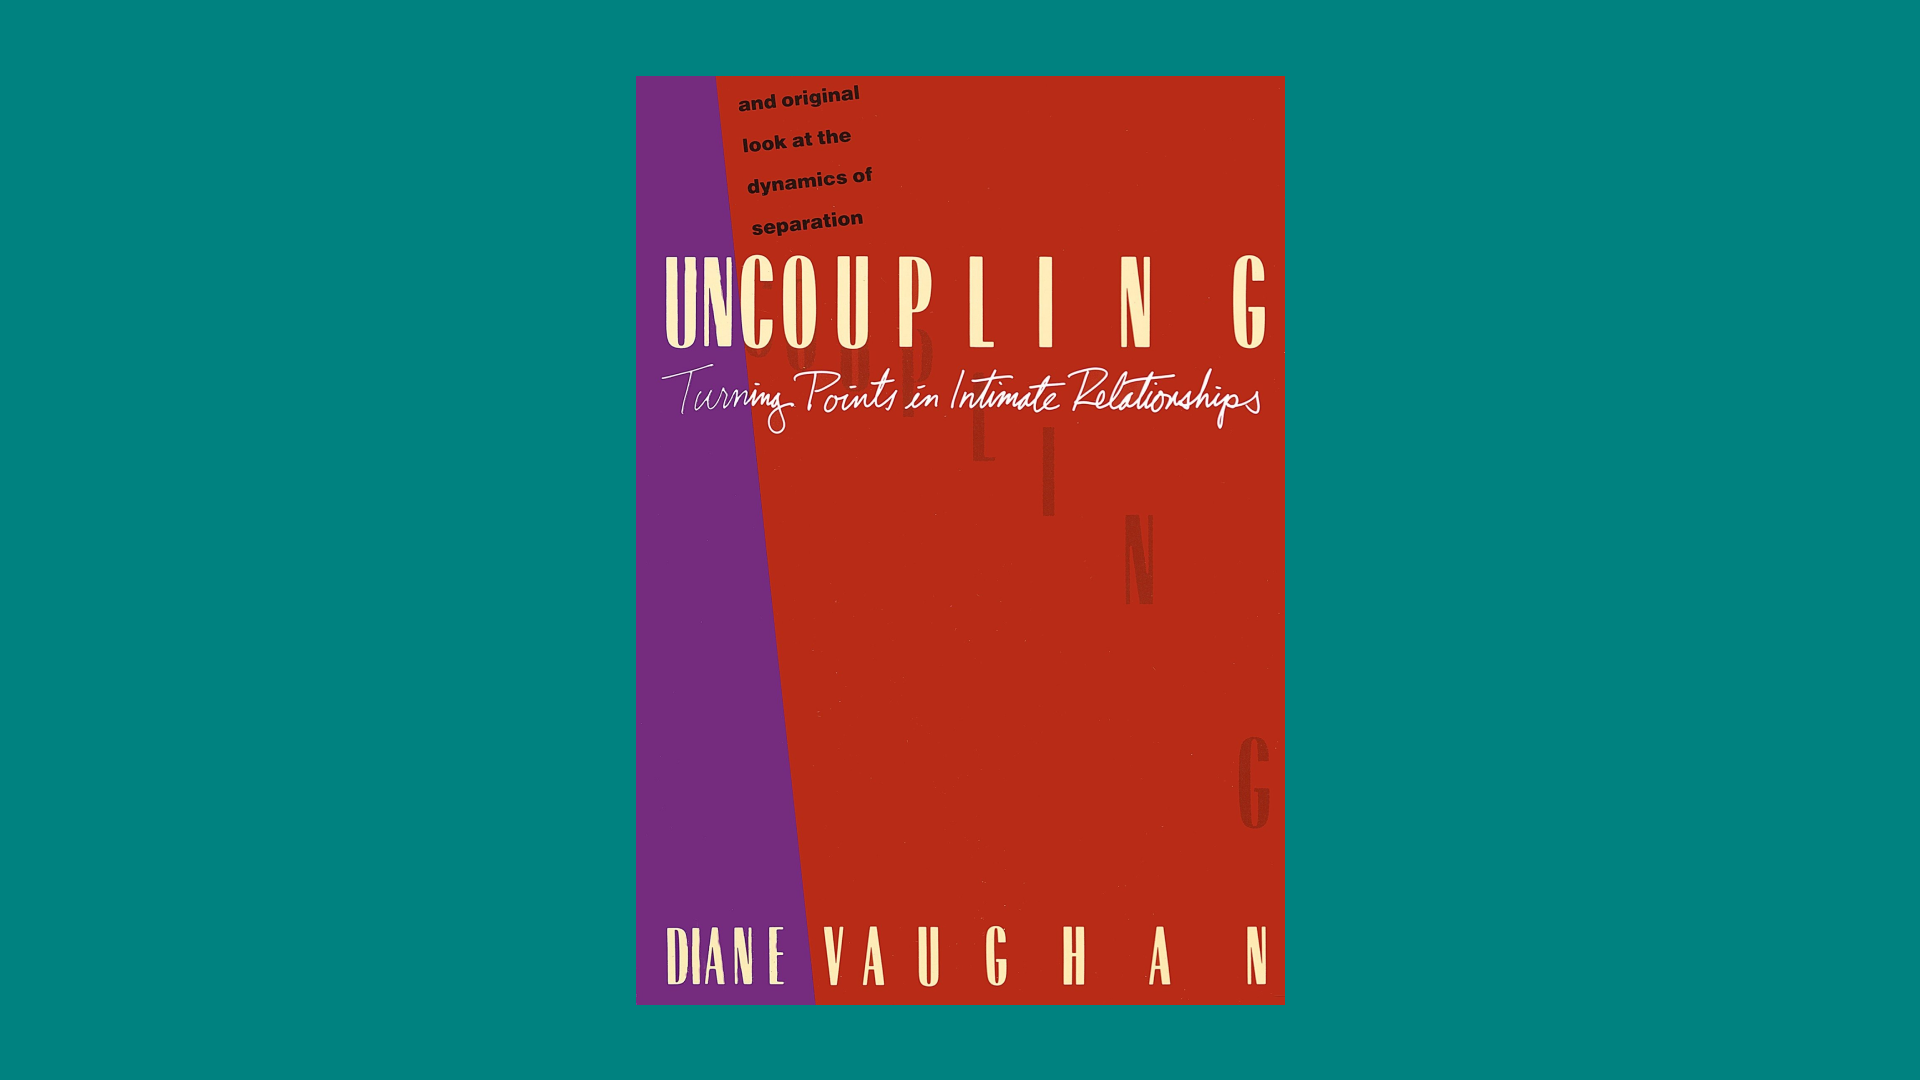 “Uncoupling: Turning Points in Intimate Relationships” by Diane Vaughan